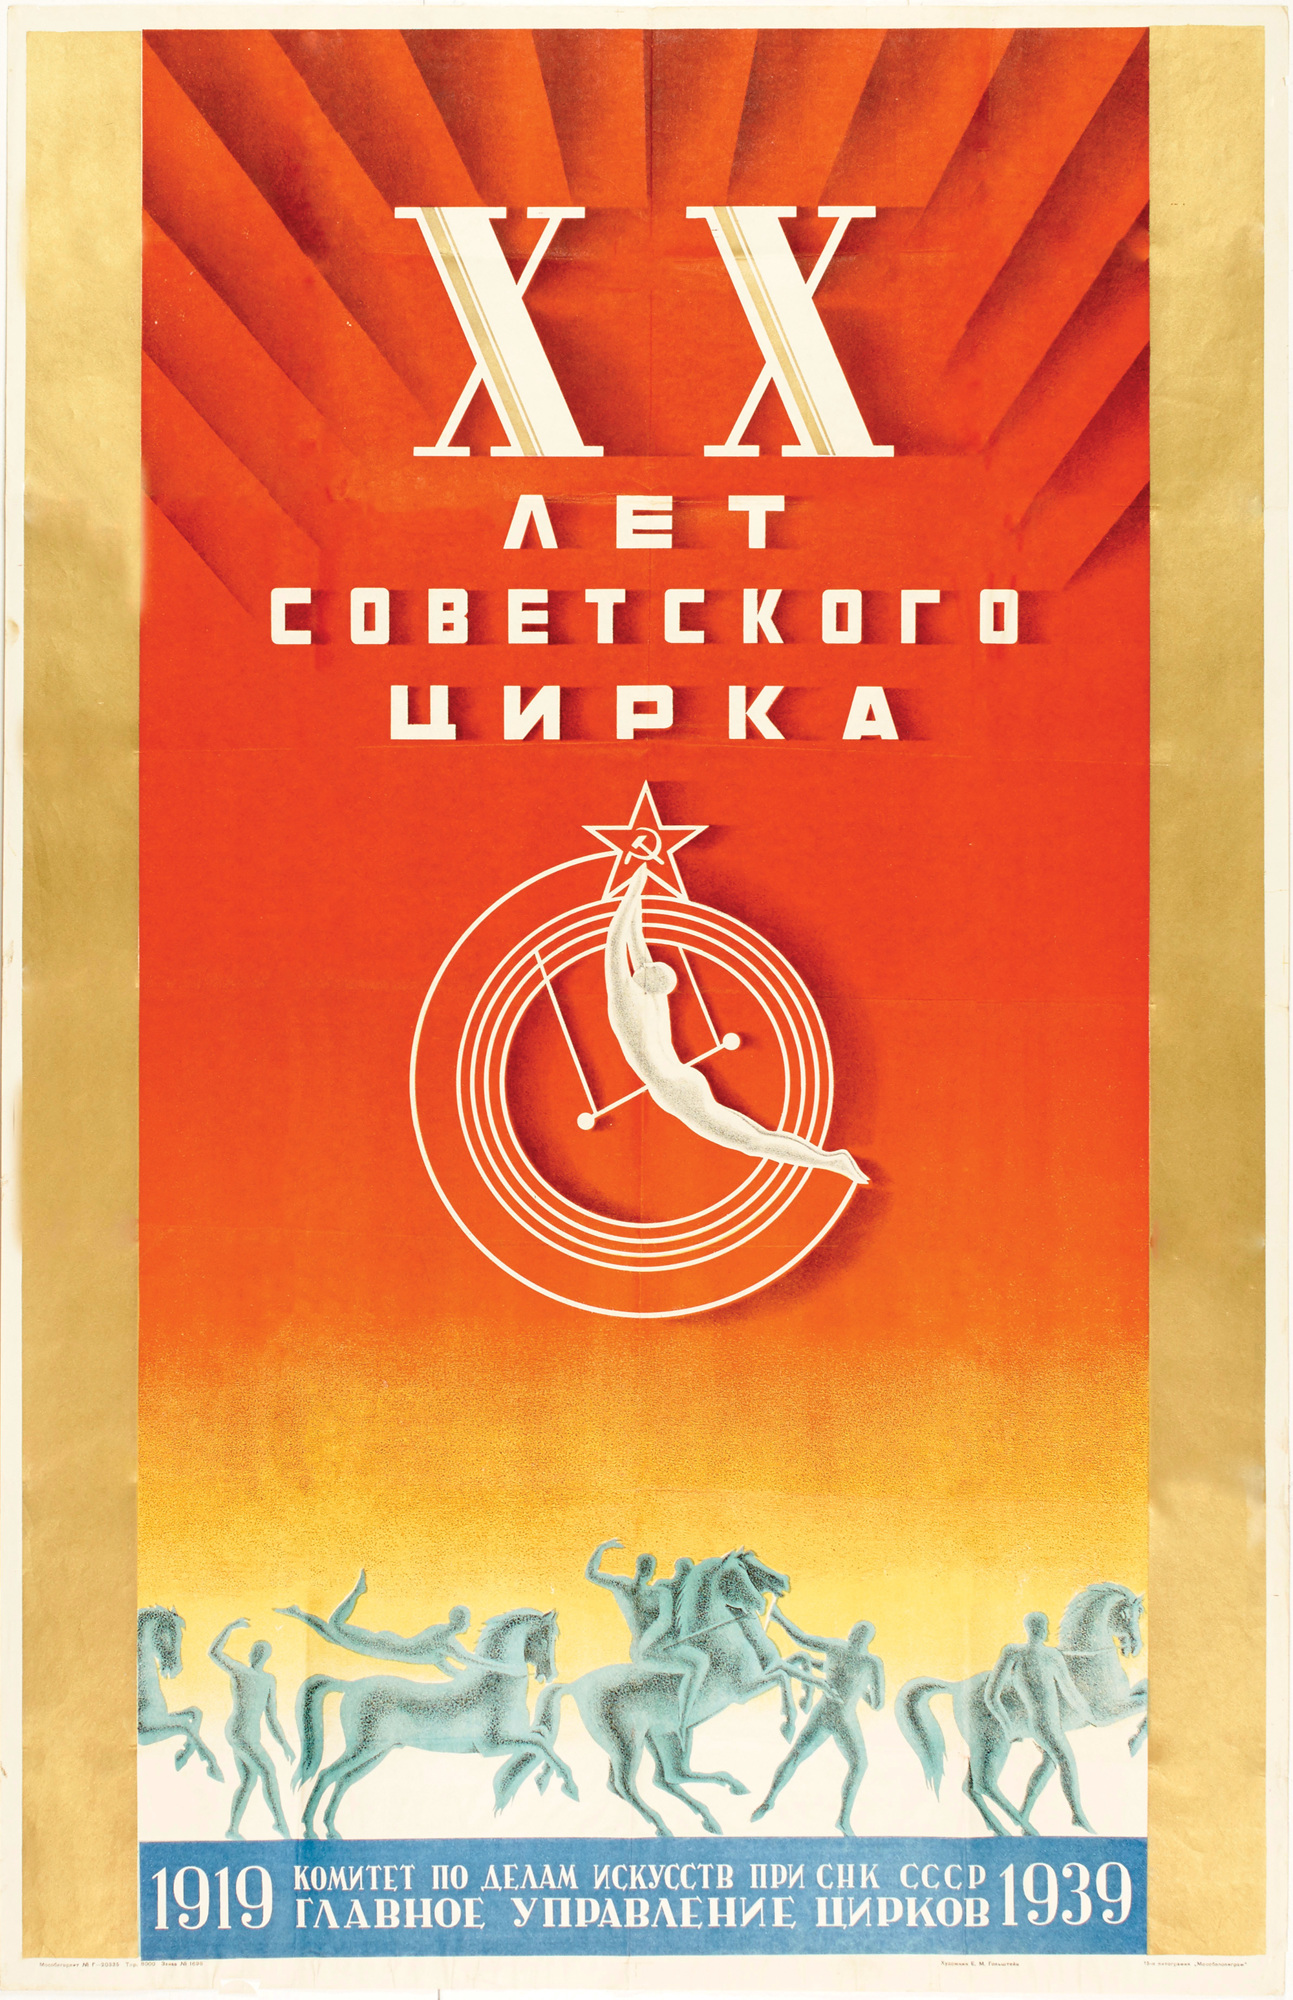 This Russian poster, from 1939, shows the stark aesthetic of the Soviet culture of the time.